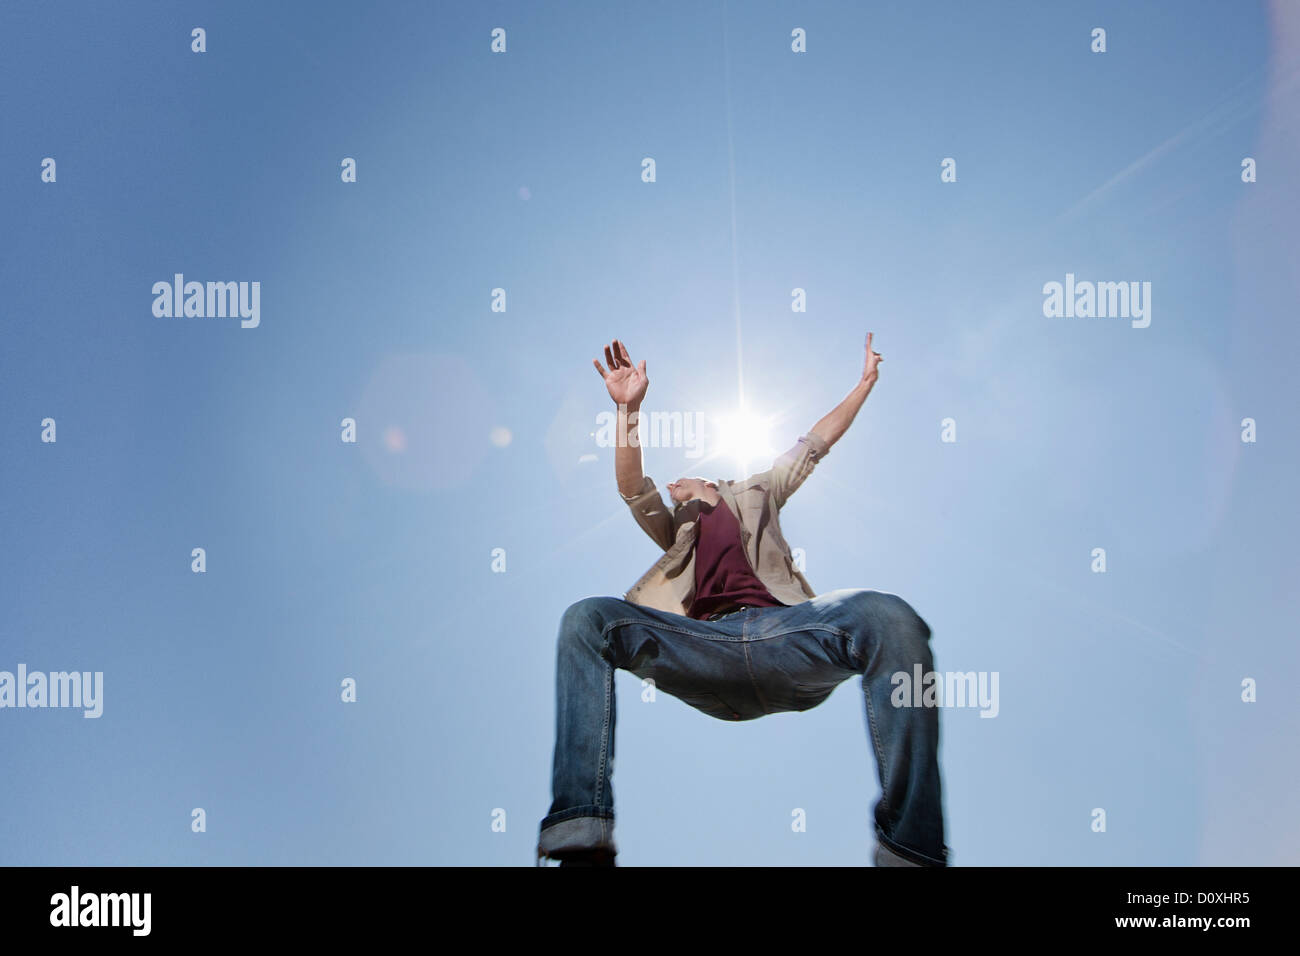 Young man jumping against blue sky, low angle Stock Photo